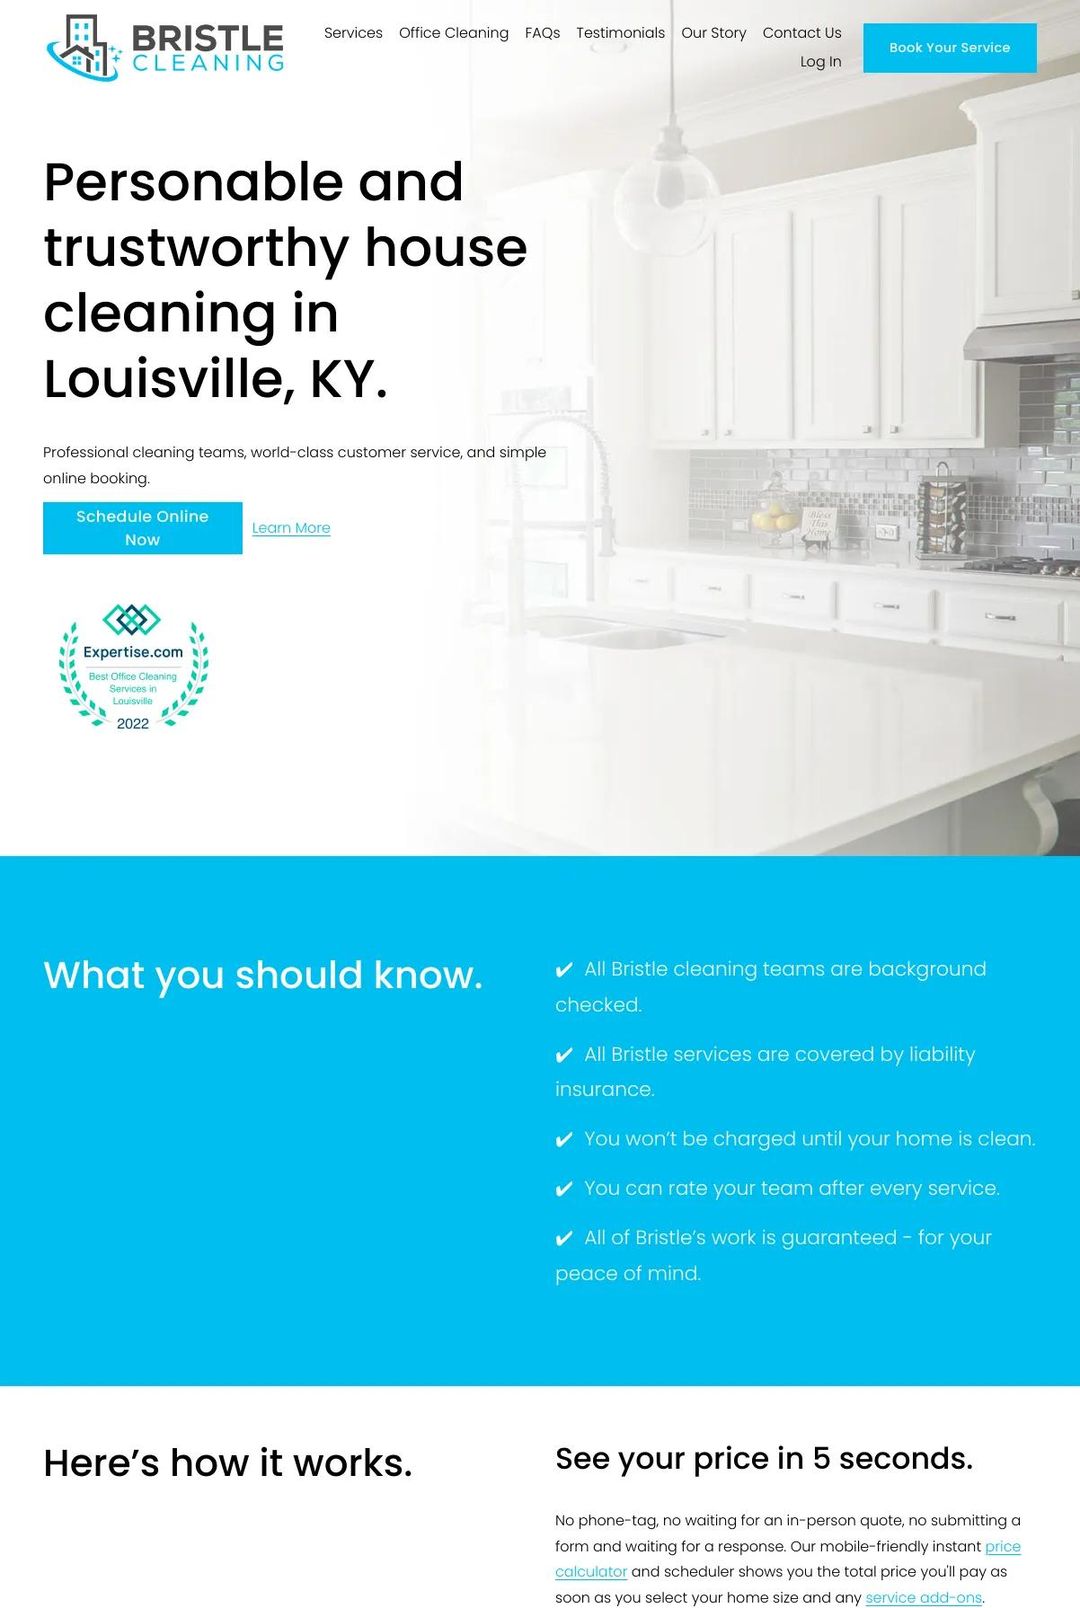 Screenshot 1 of Bristle Cleaning (Example Squarespace Cleaning Services Website)